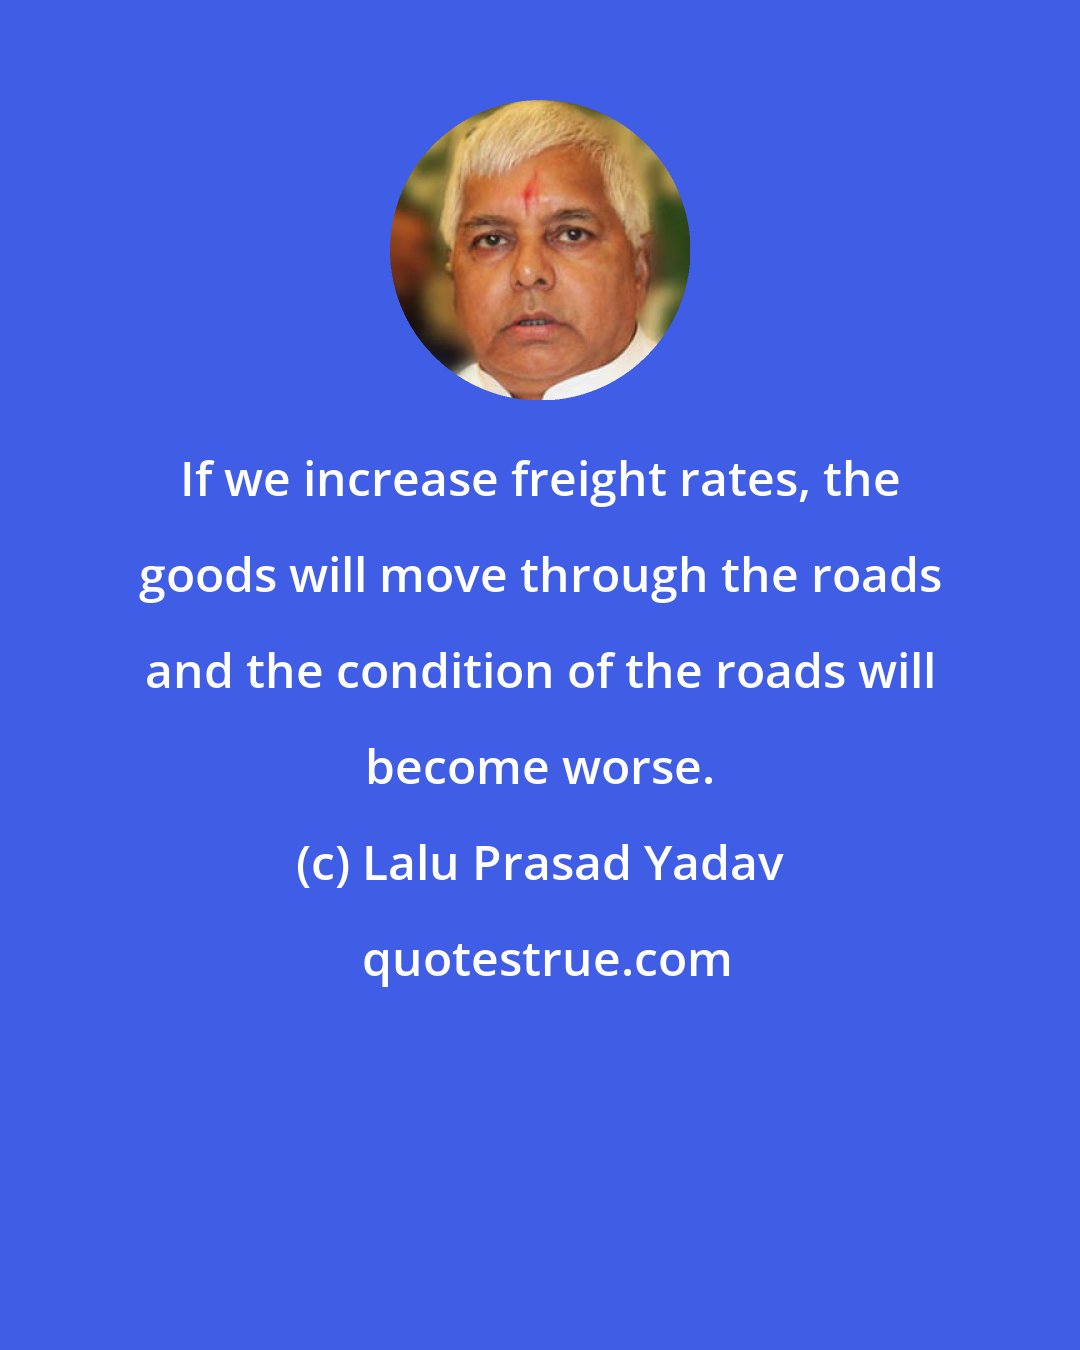 Lalu Prasad Yadav: If we increase freight rates, the goods will move through the roads and the condition of the roads will become worse.